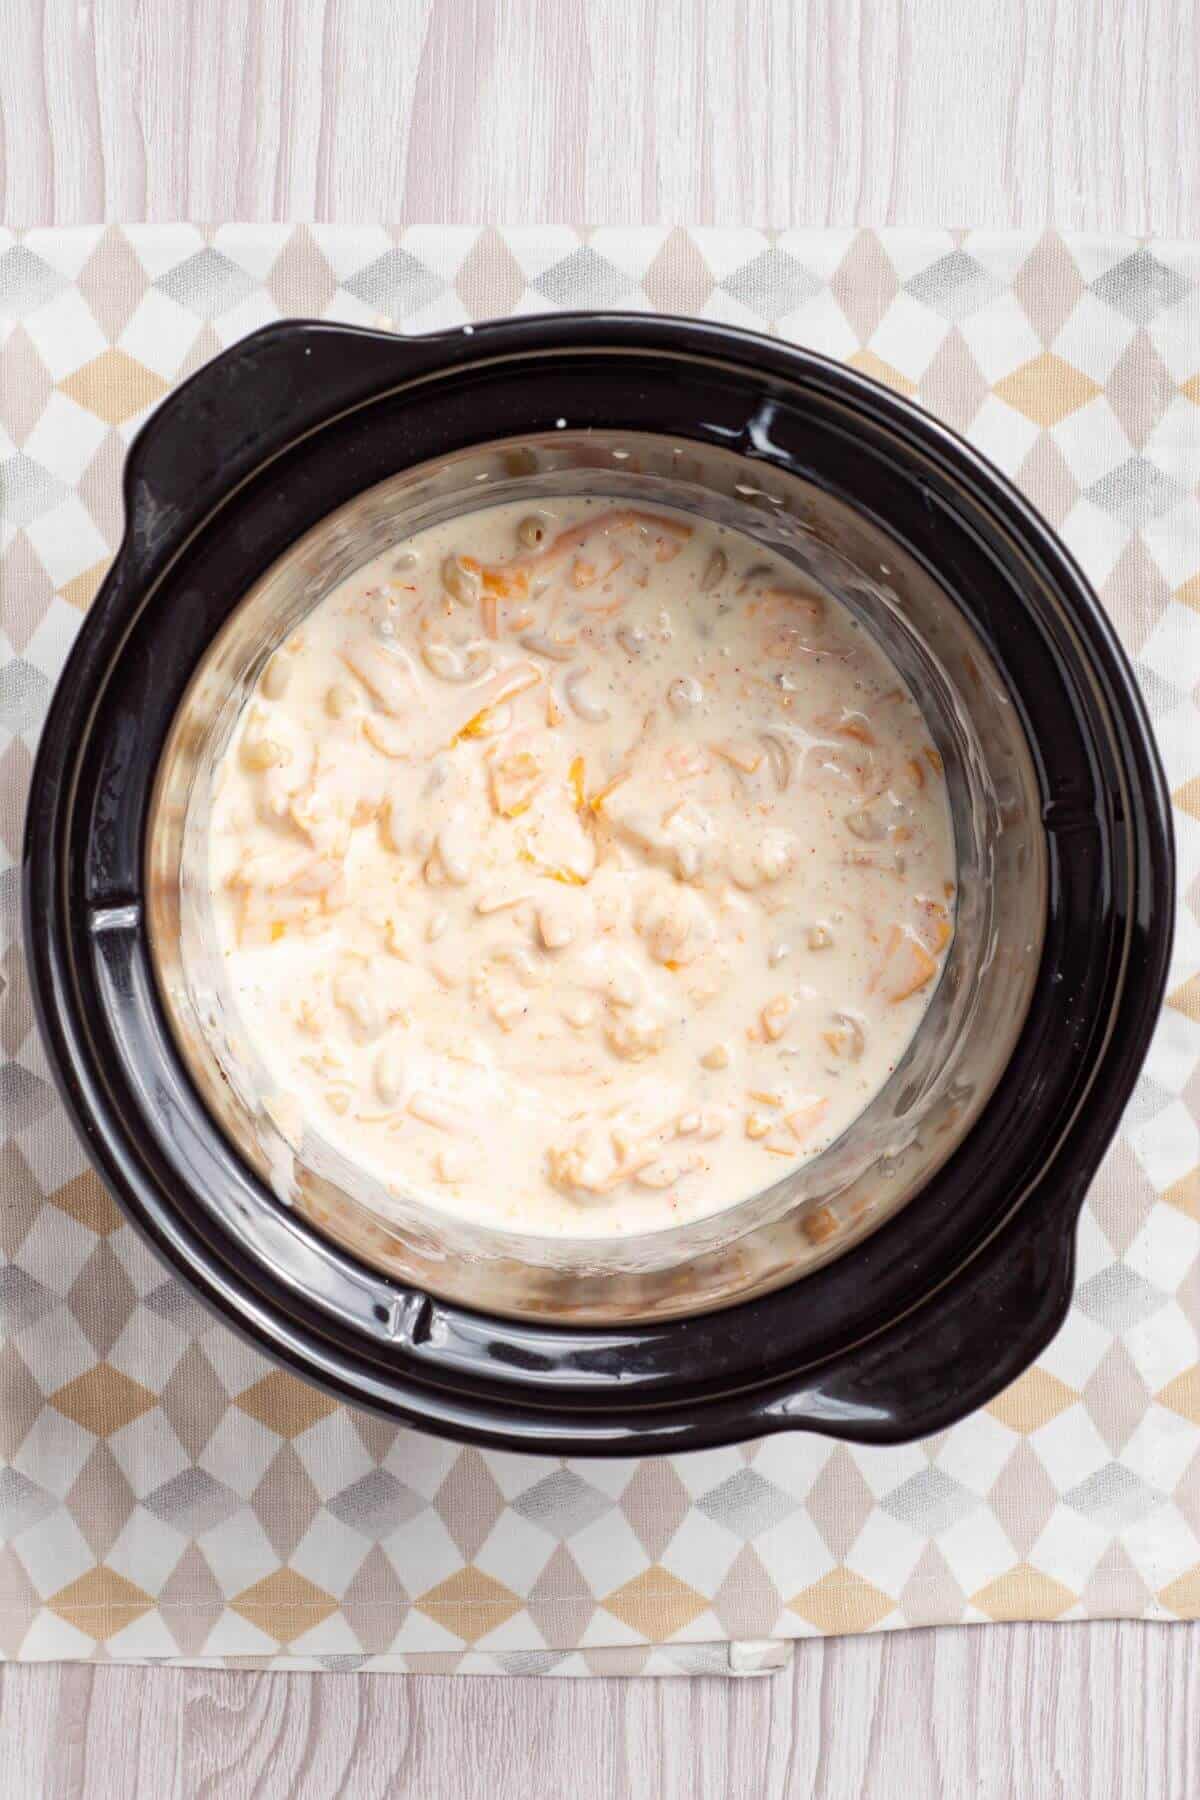 A crock pot with a mac and cheese mixture.